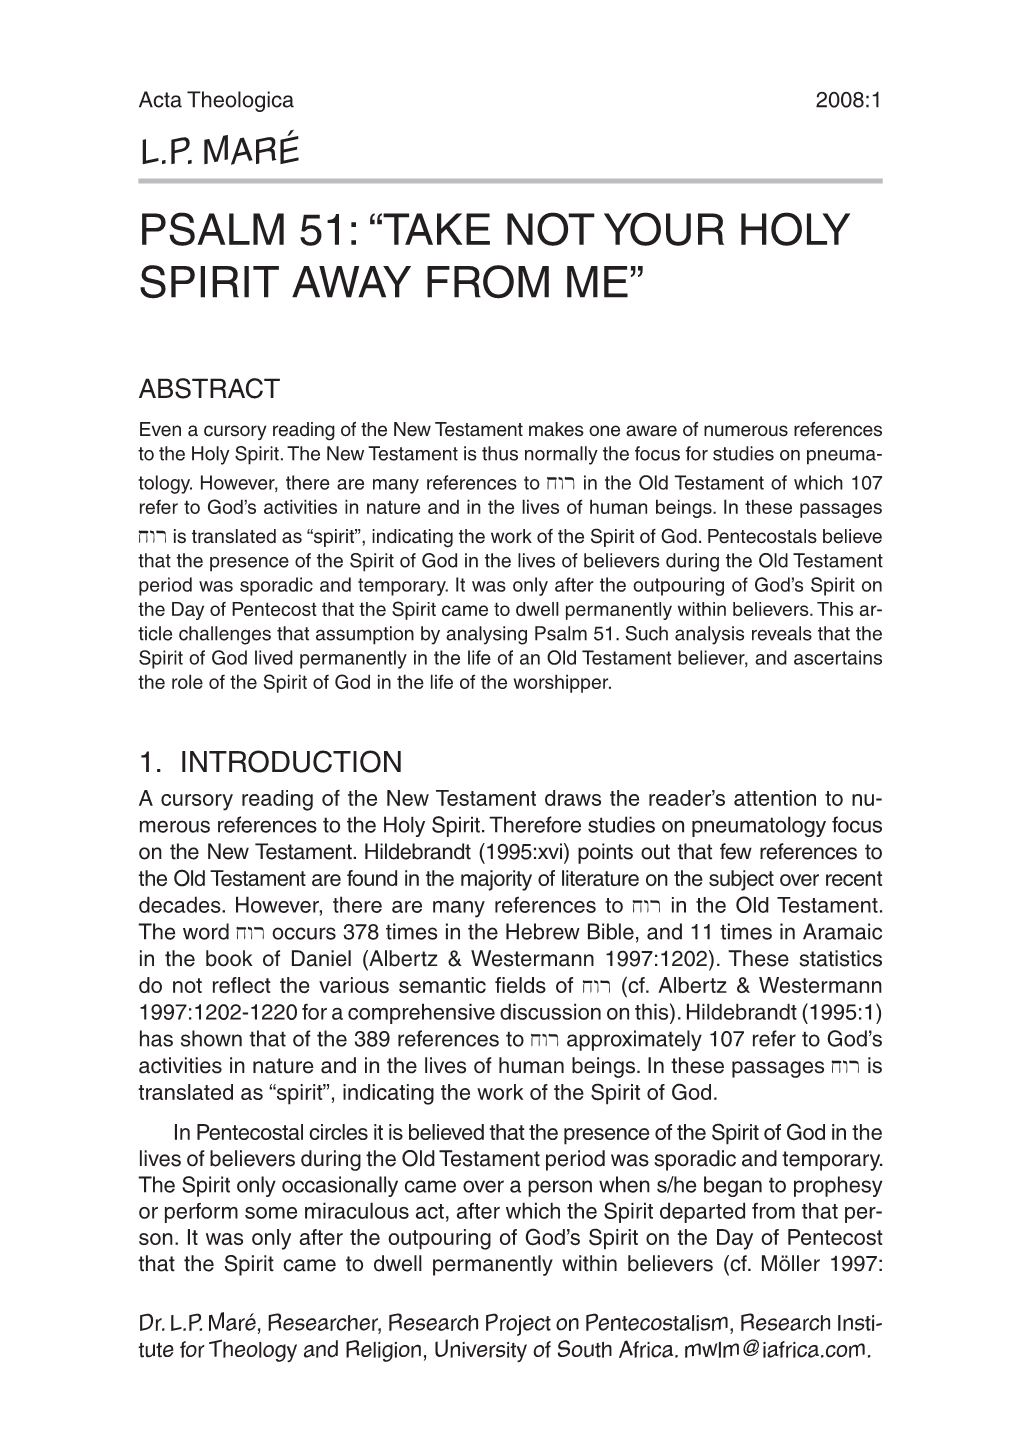 Psalm 51: “Take Not Your Holy Spirit Away from Me”